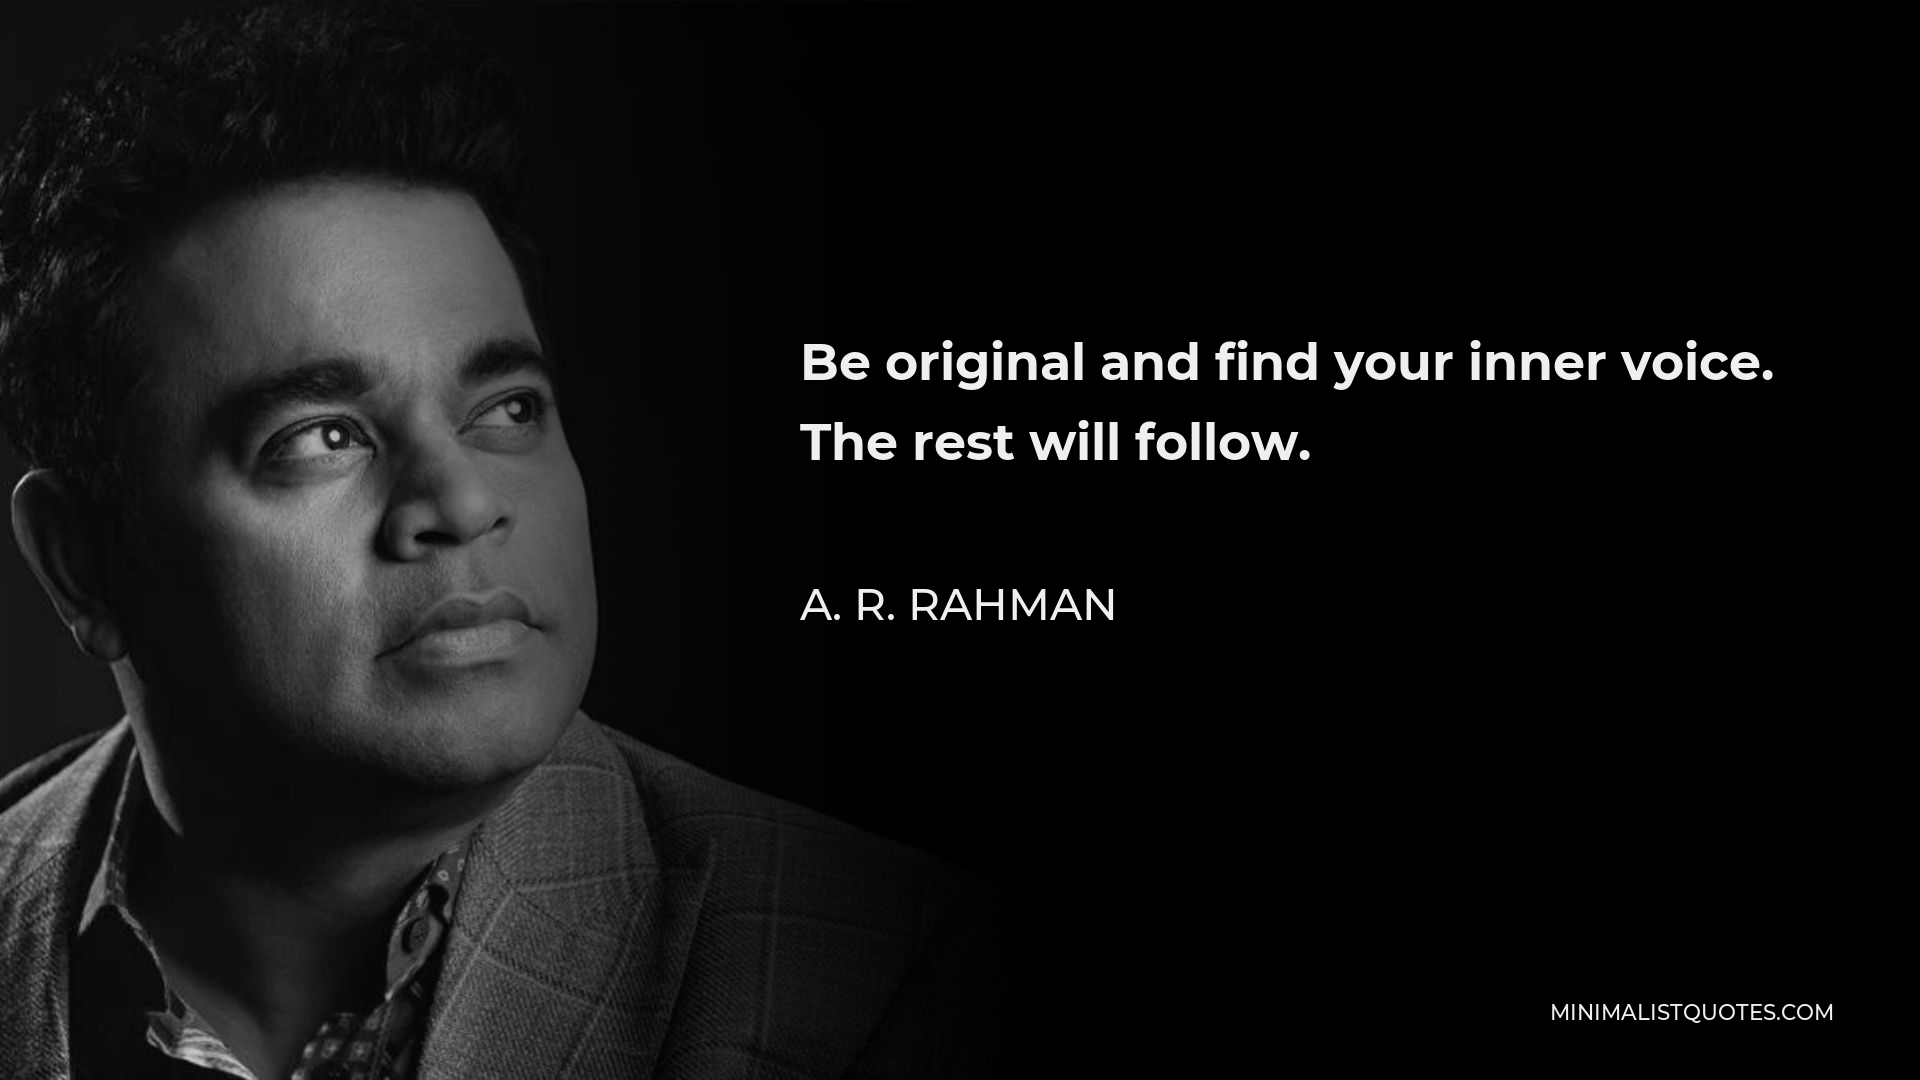 A. R. Rahman Quote - Be original and find your inner voice. The rest will follow.